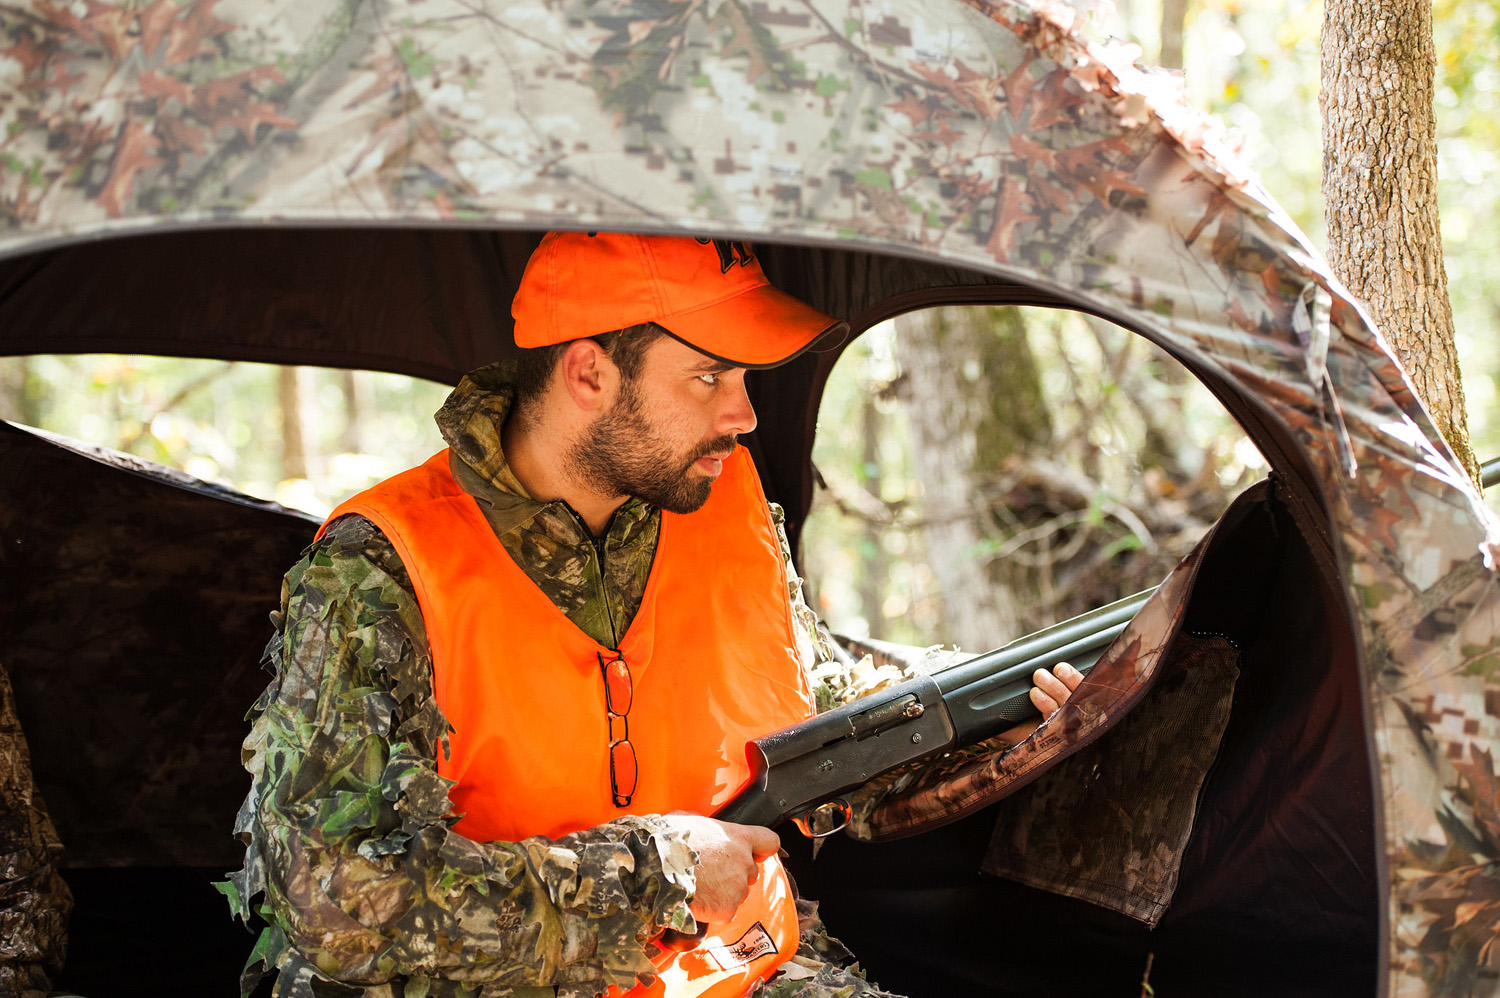 Deer Hunting Products and Tools | Esh Hardware